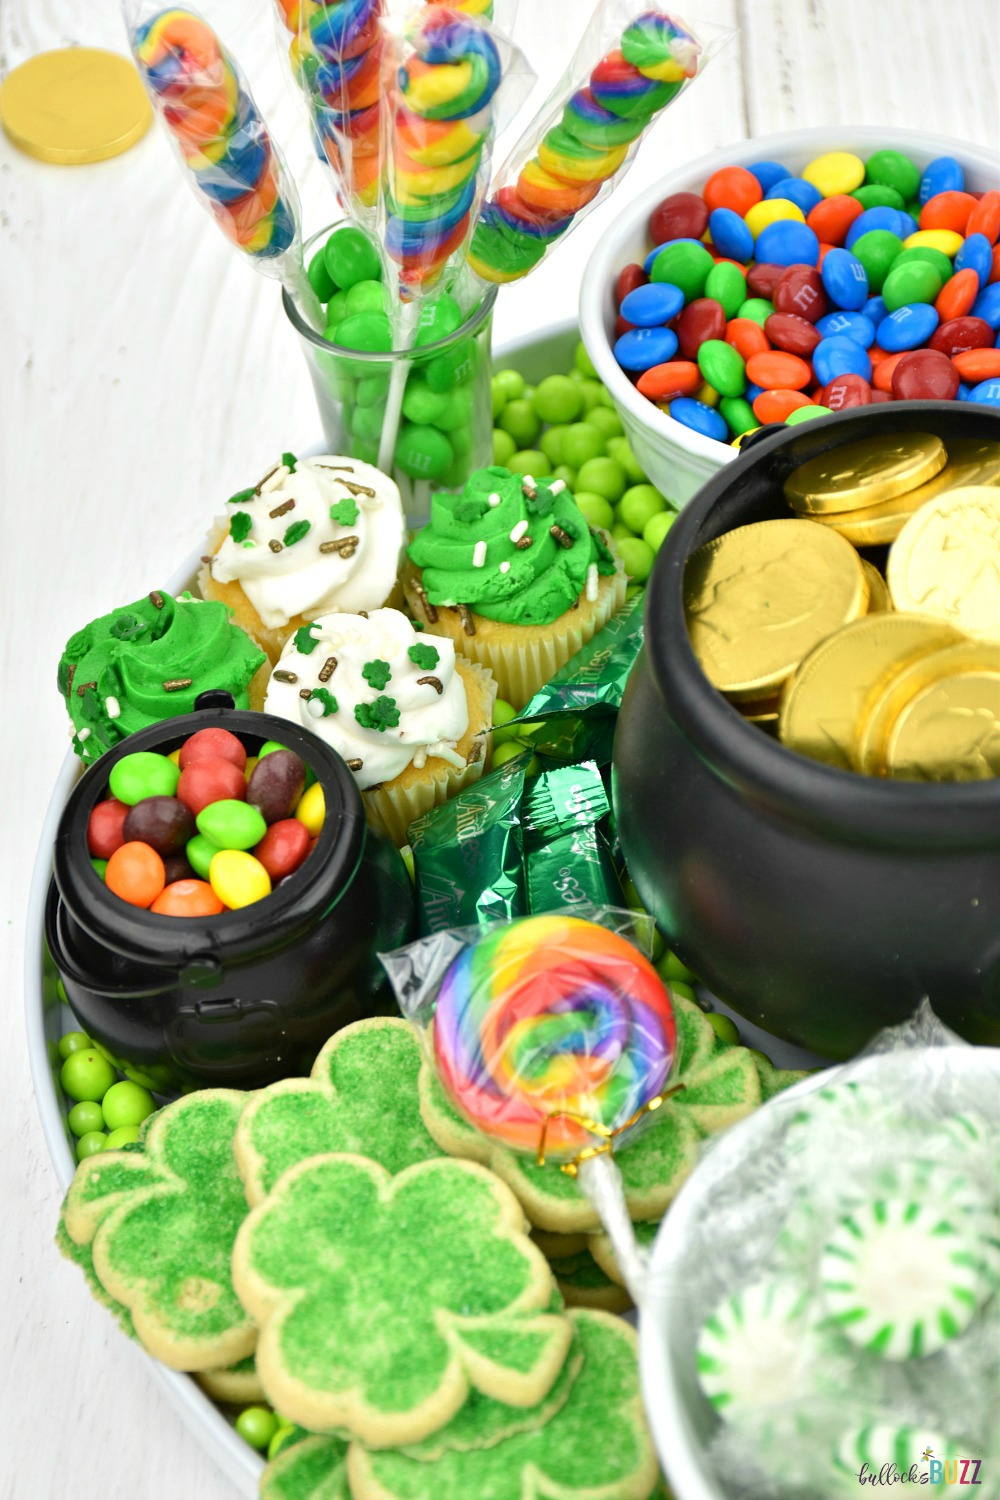 From shamrocks to rainbows plus a pot of gold, this sweet St. Patrick's Day Dessert Charcuterie Board has it all! #stpatricksday #recipe #charcuterieboard